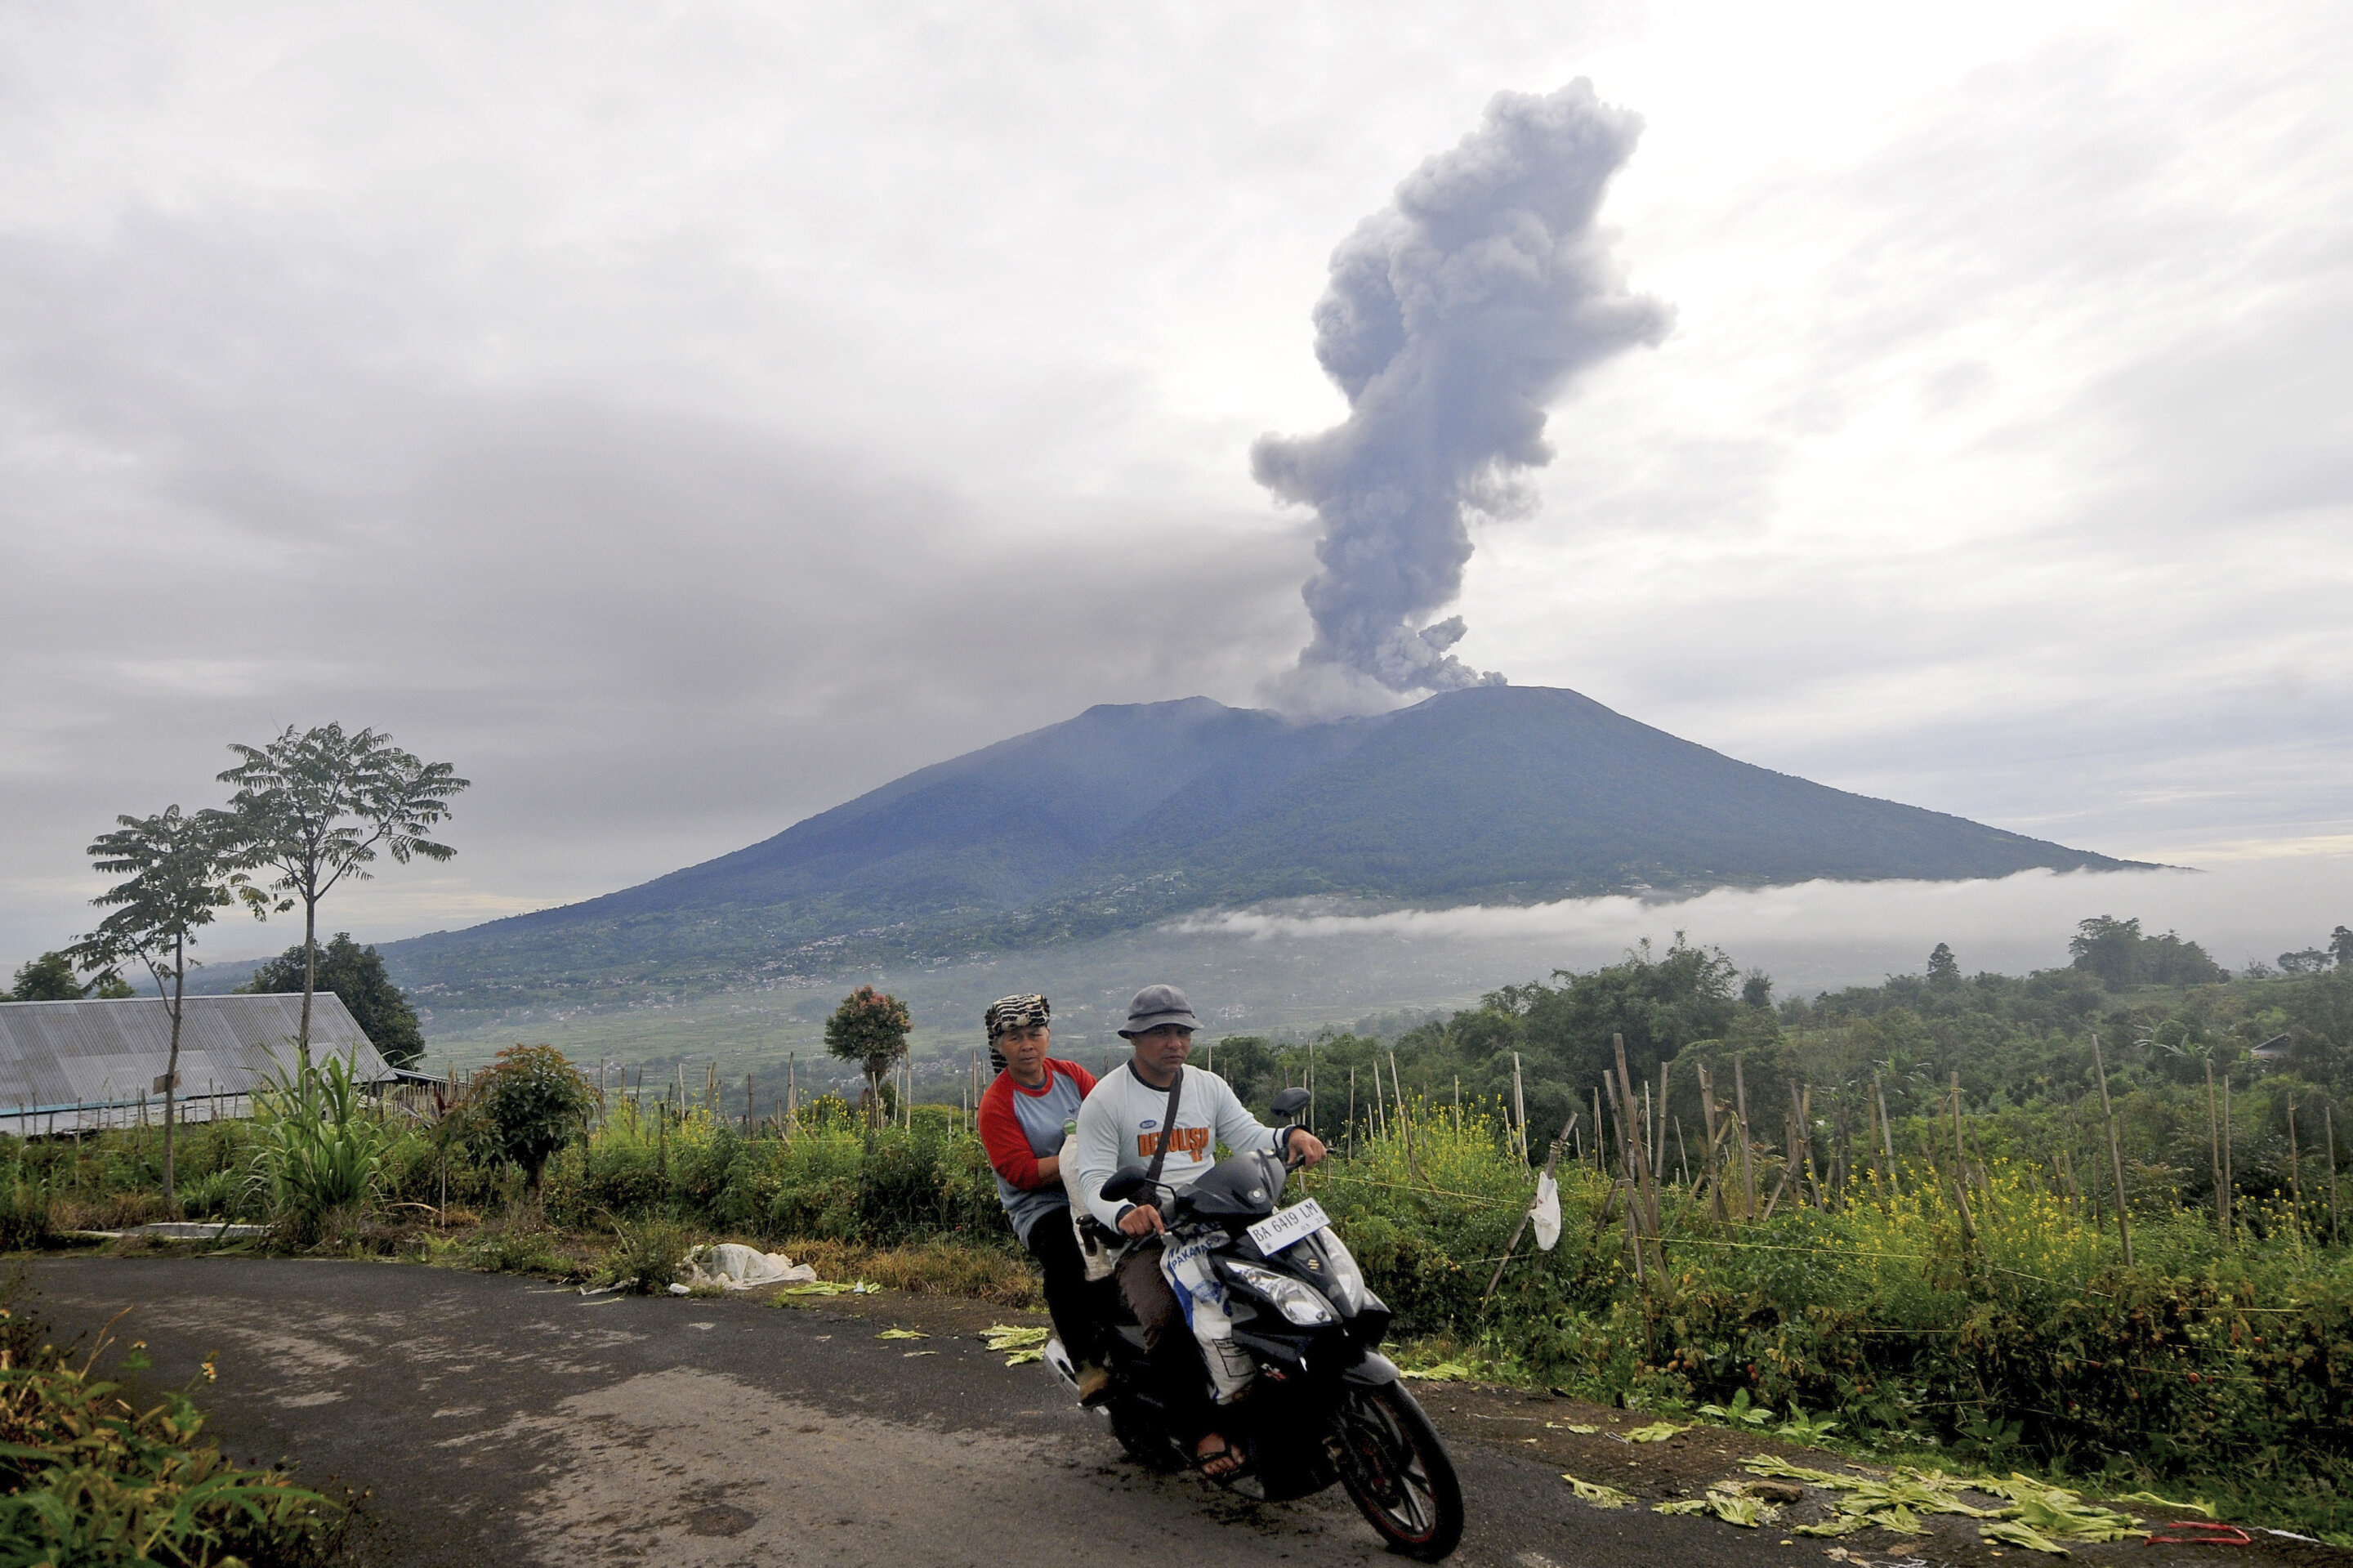 11 bodies recovered after volcanic eruption in Indonesia, and 12 climbers are still missing